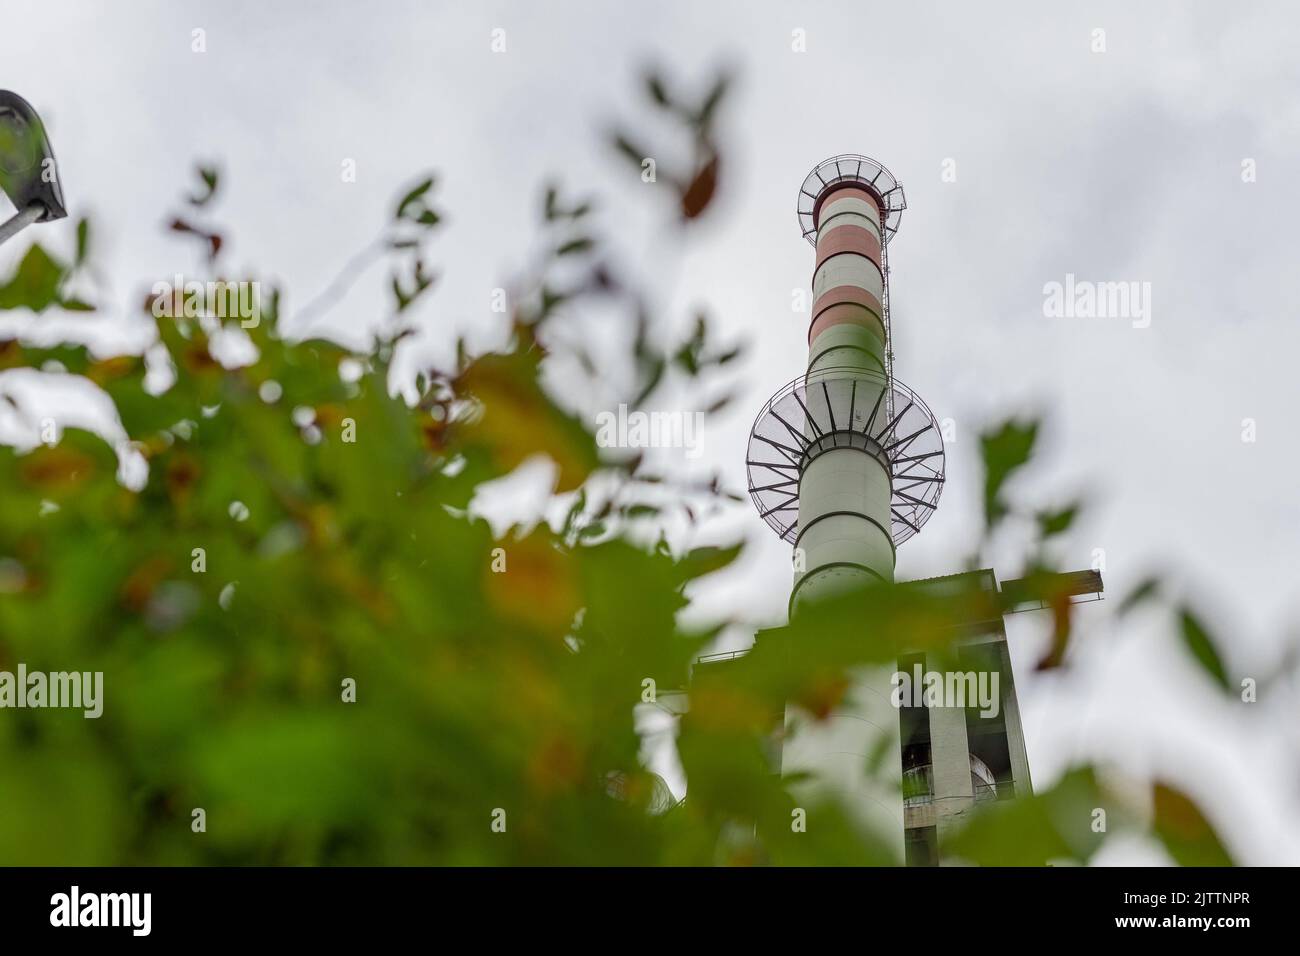 Factory chimney rising up from green foliage. Concept photo of green energy or not so green energy. Interesting shape of a chimney. Stock Photo